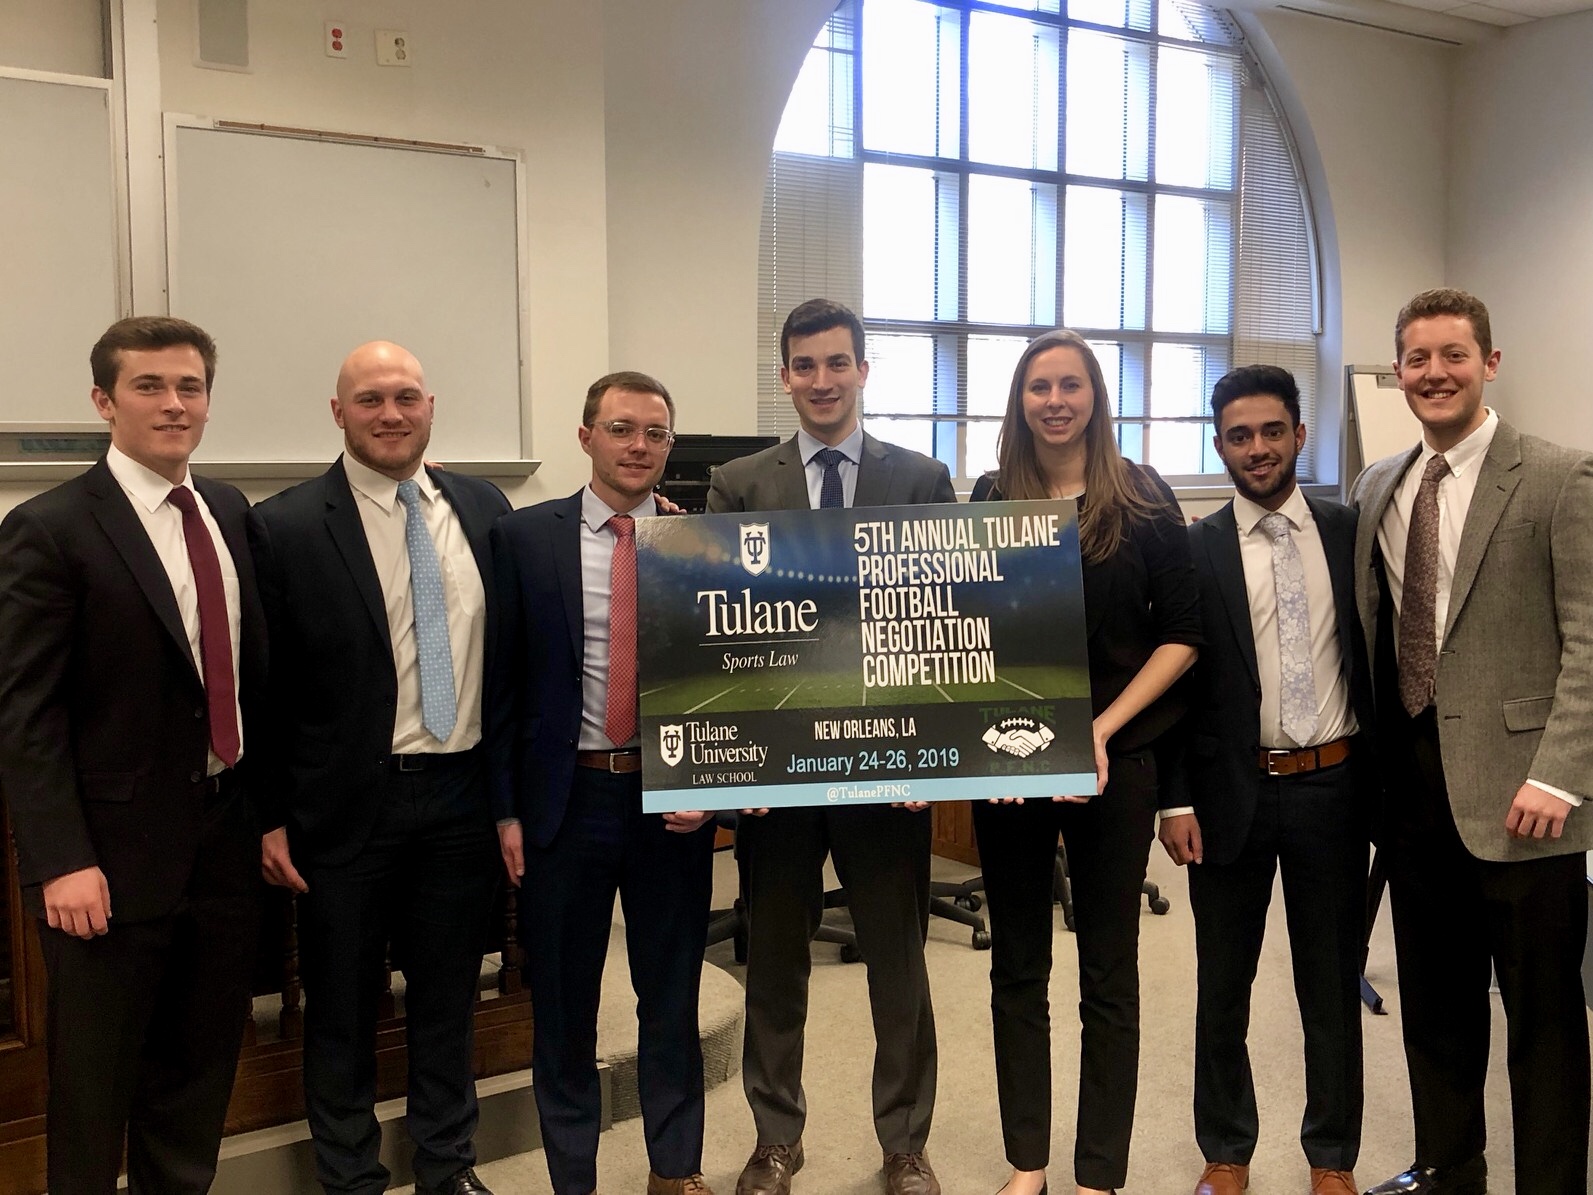 Students compete in Tulane pro footbal negotiation competition